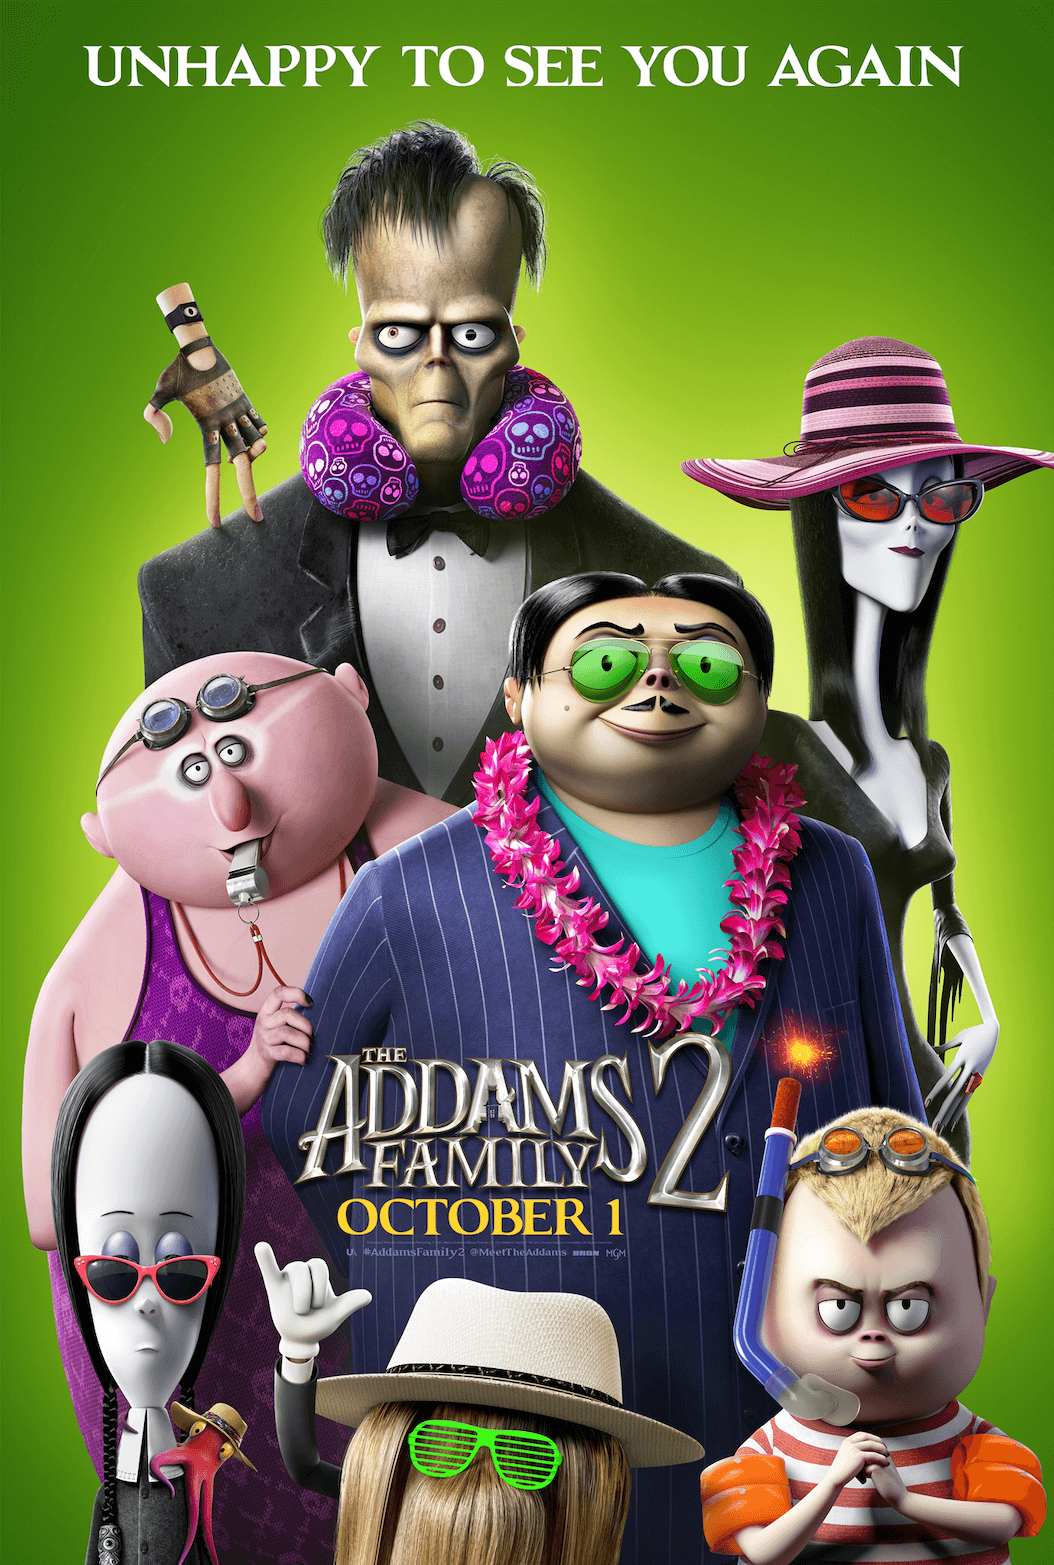 The Addams Family 2 | New Movie Hits Theaters October 1st